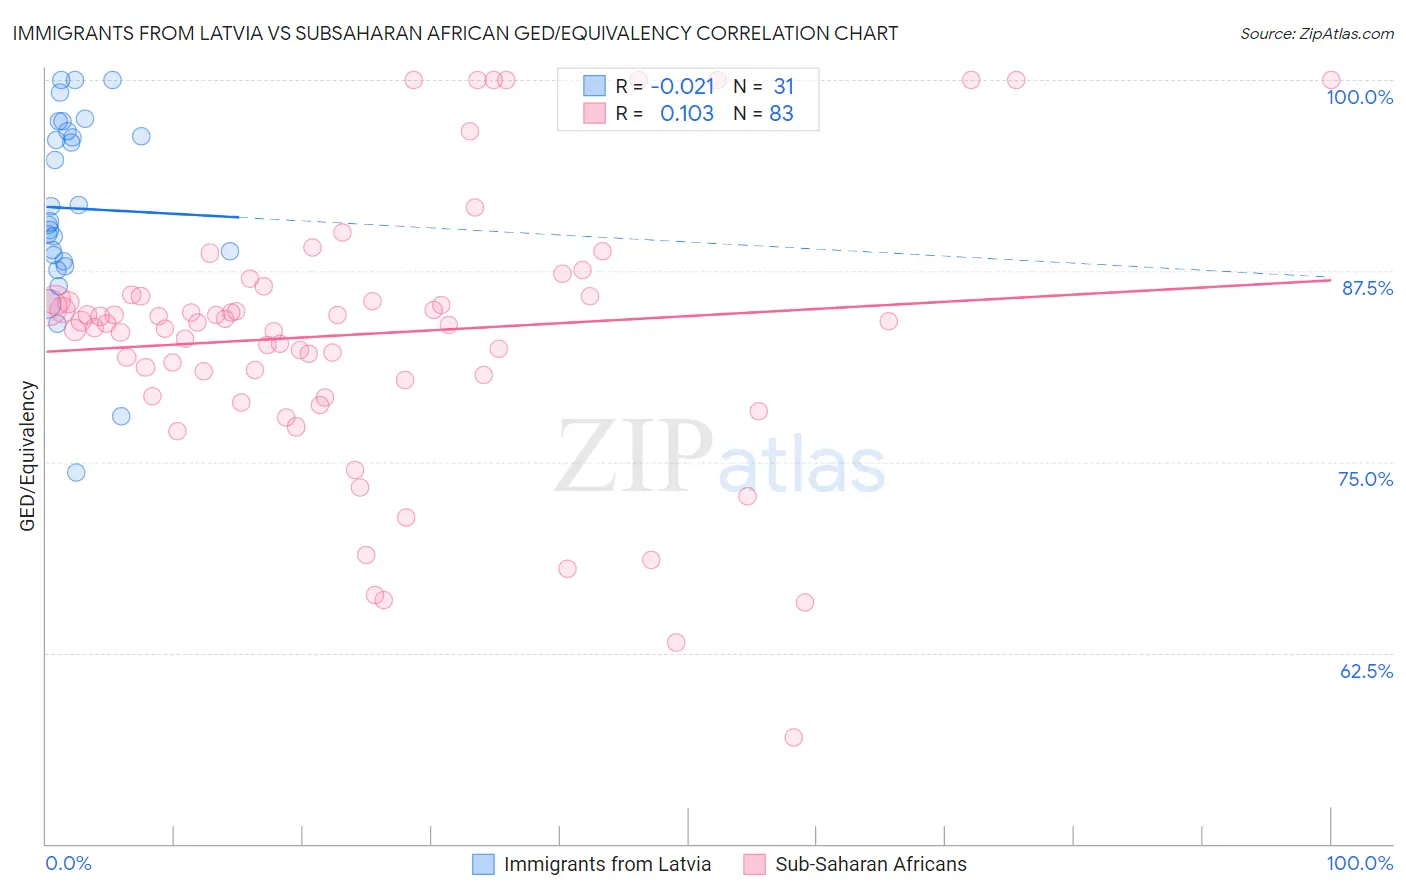 Immigrants from Latvia vs Subsaharan African GED/Equivalency